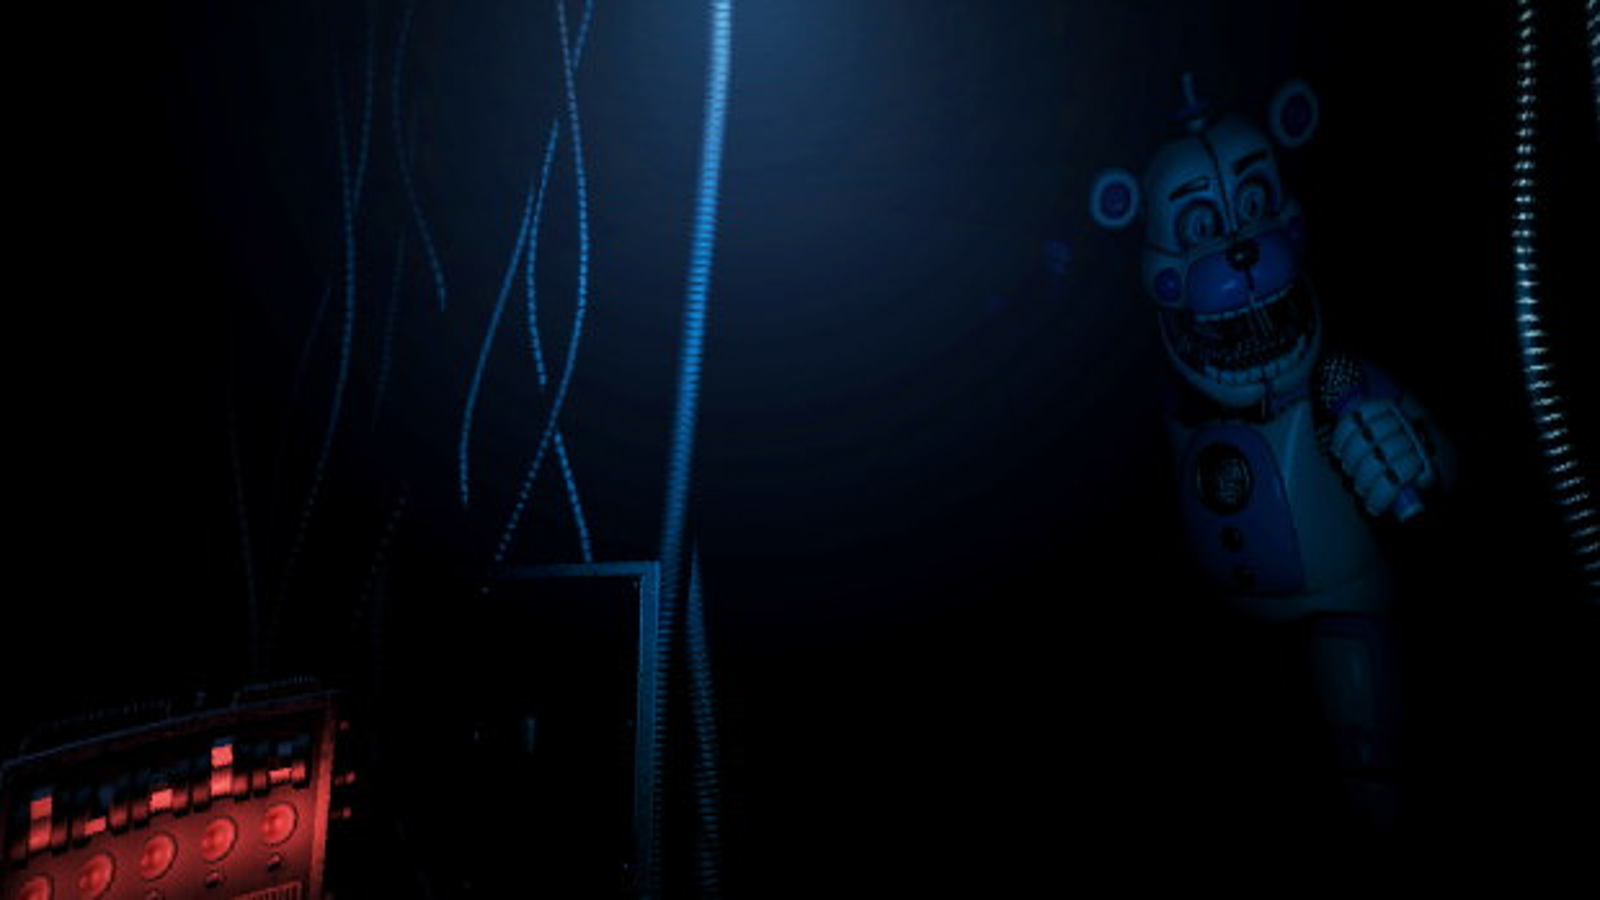 Play Five Nights At Freddy' s: Sister Location, a game of FNAF - Freddy